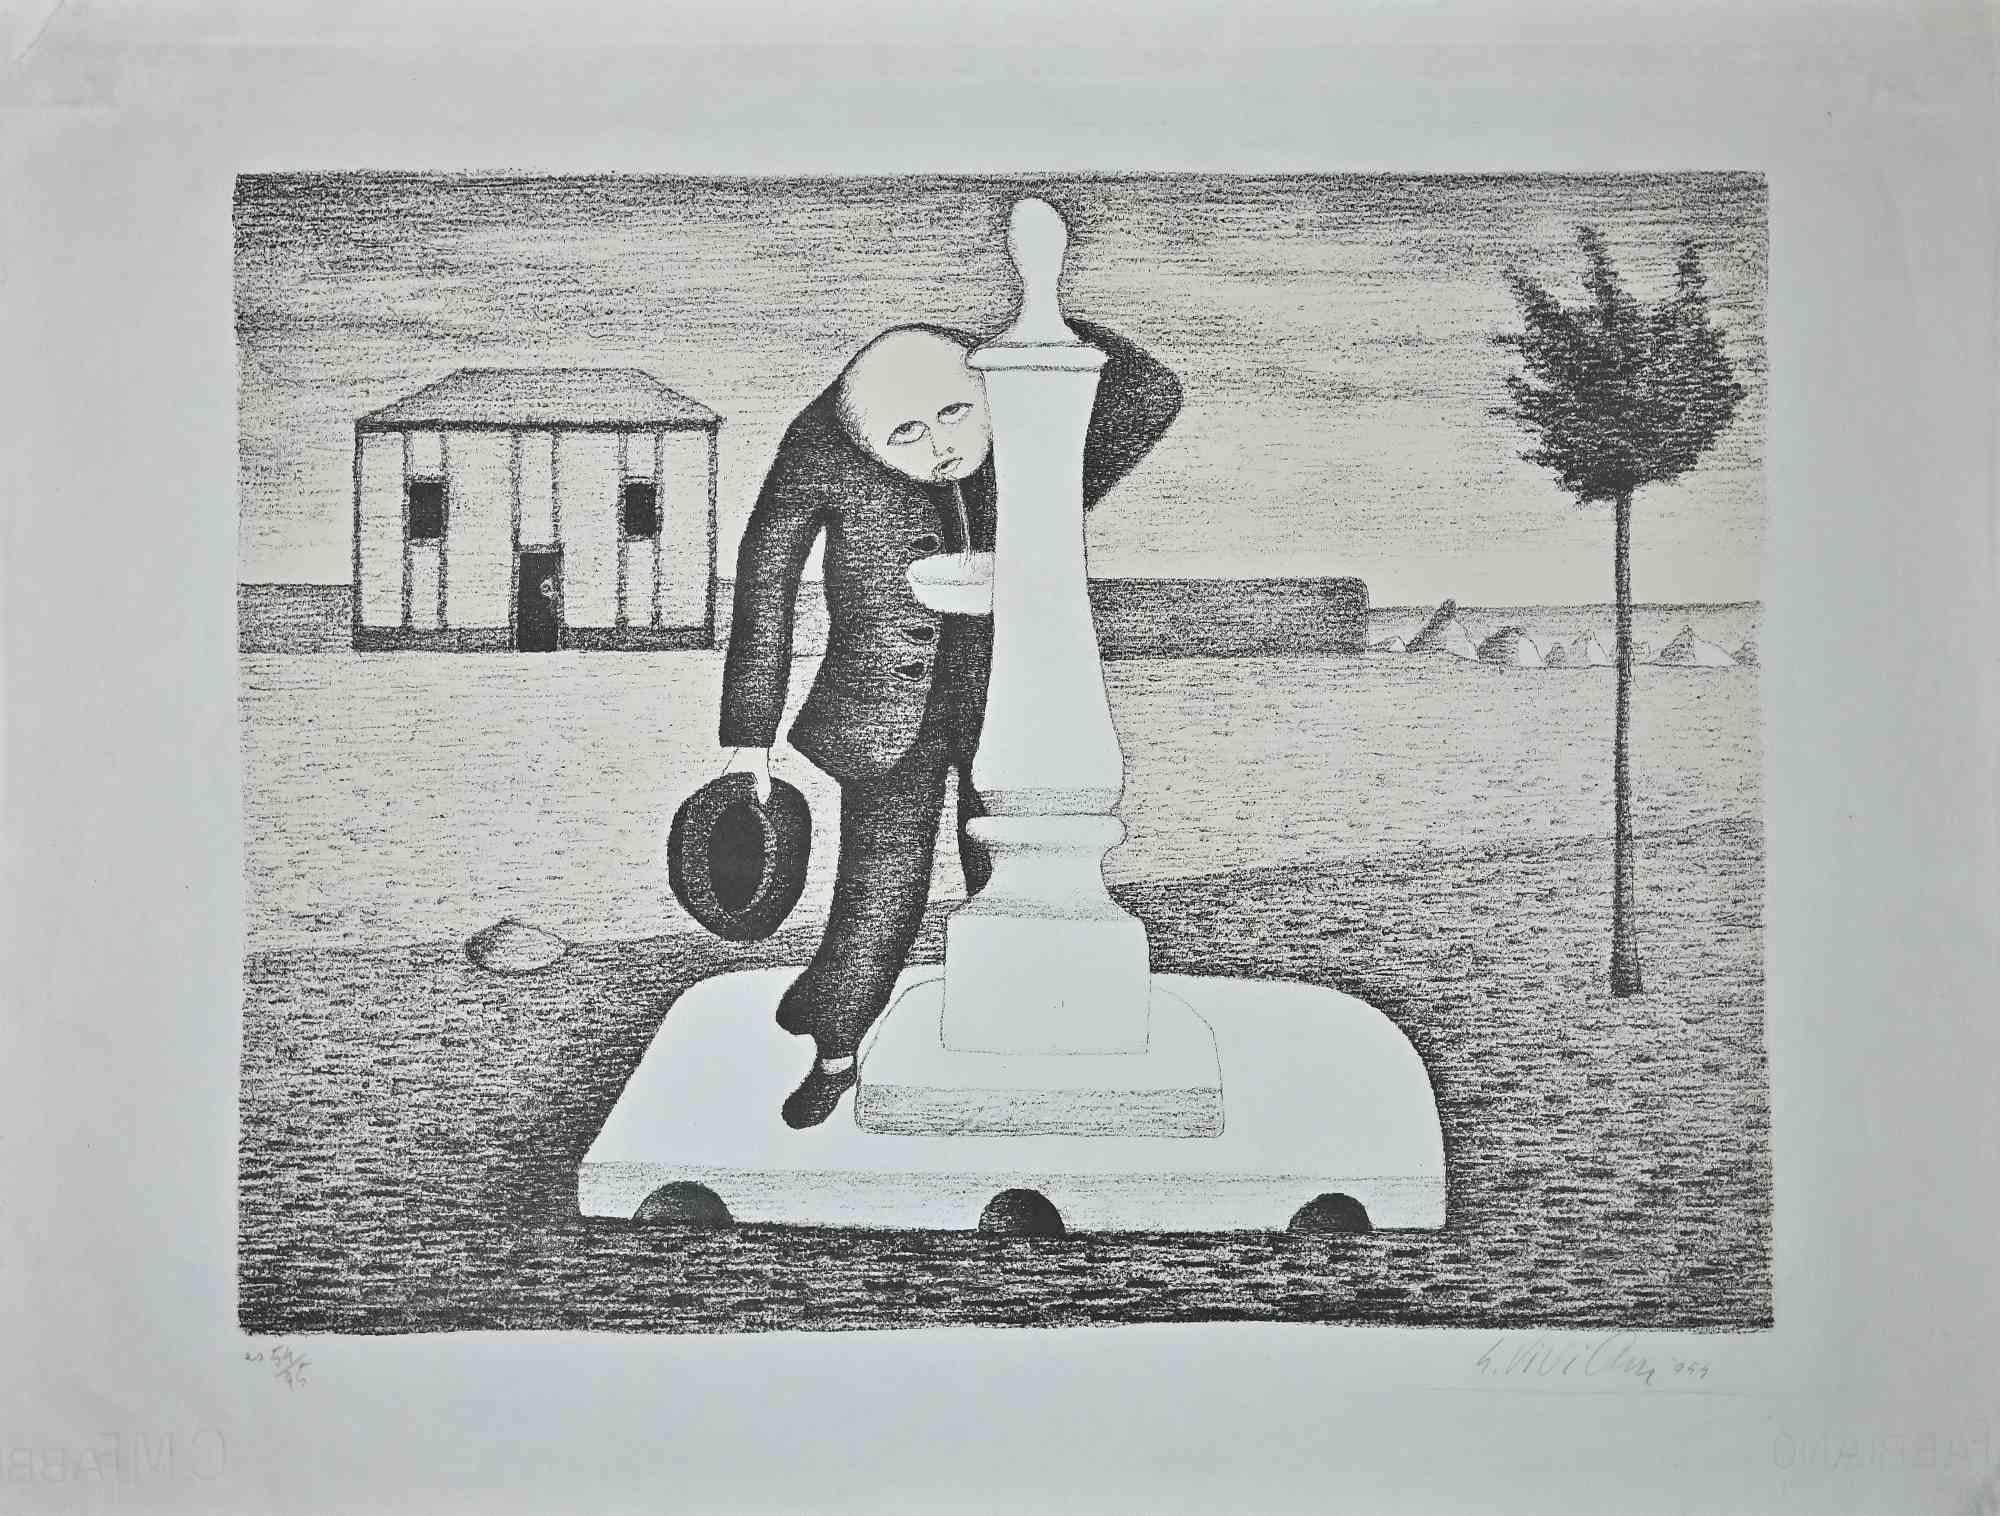 The Fountain is an original artwork realized in 1954 by Giuseppe Viviani (Agnano, San Giuliano Terme, 1898 - Pisa, 1965)

Original B/W Lithograph.

Hand-signed and dated on the lower right corner in pencil by the artist: Viviani 954. 

Numbered in